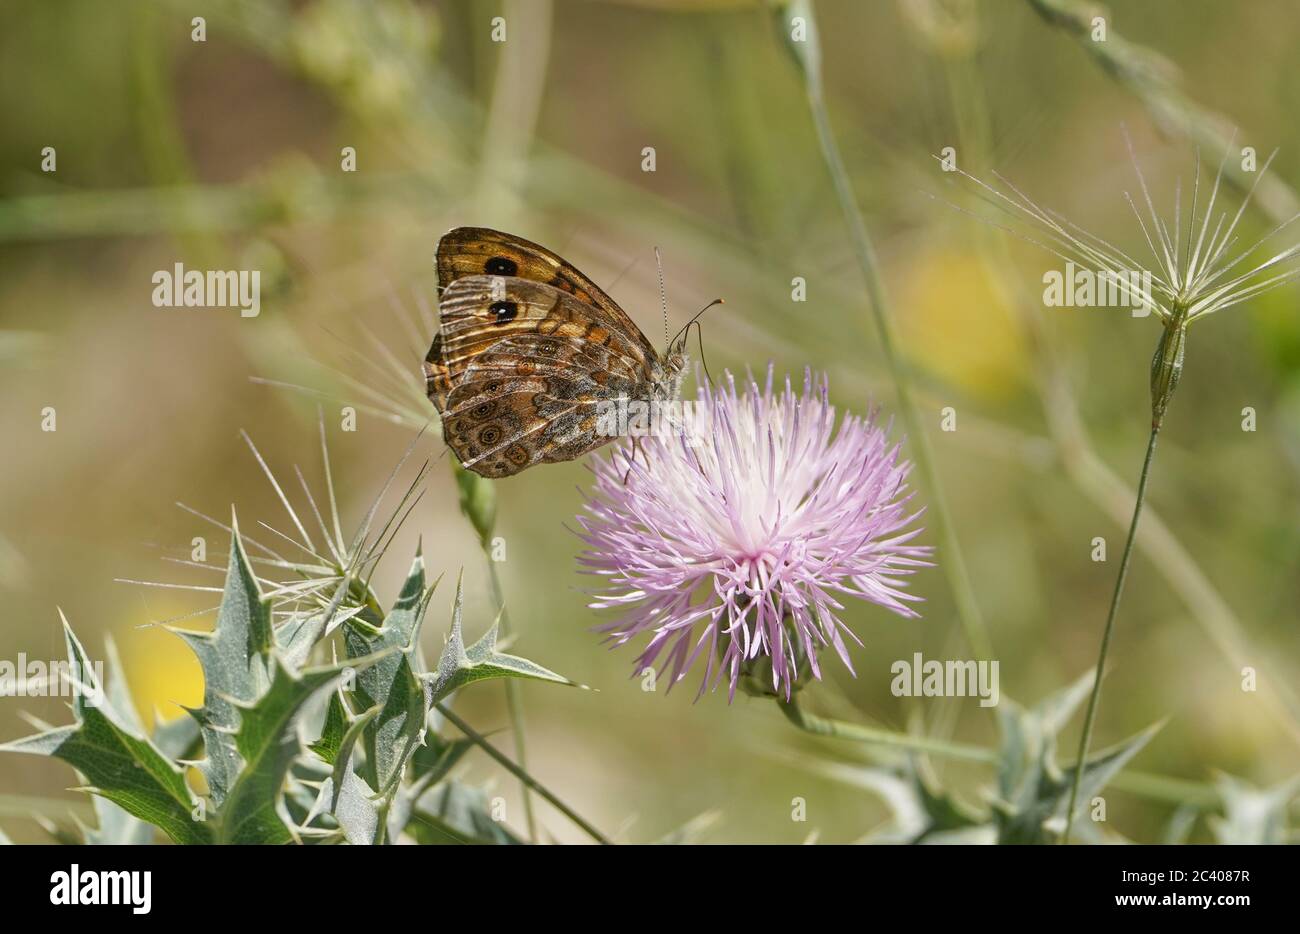 Lasiommata megera, the wall butterfly, or wall brown butterfly, Mijas, Malaga, Spain. Stock Photo